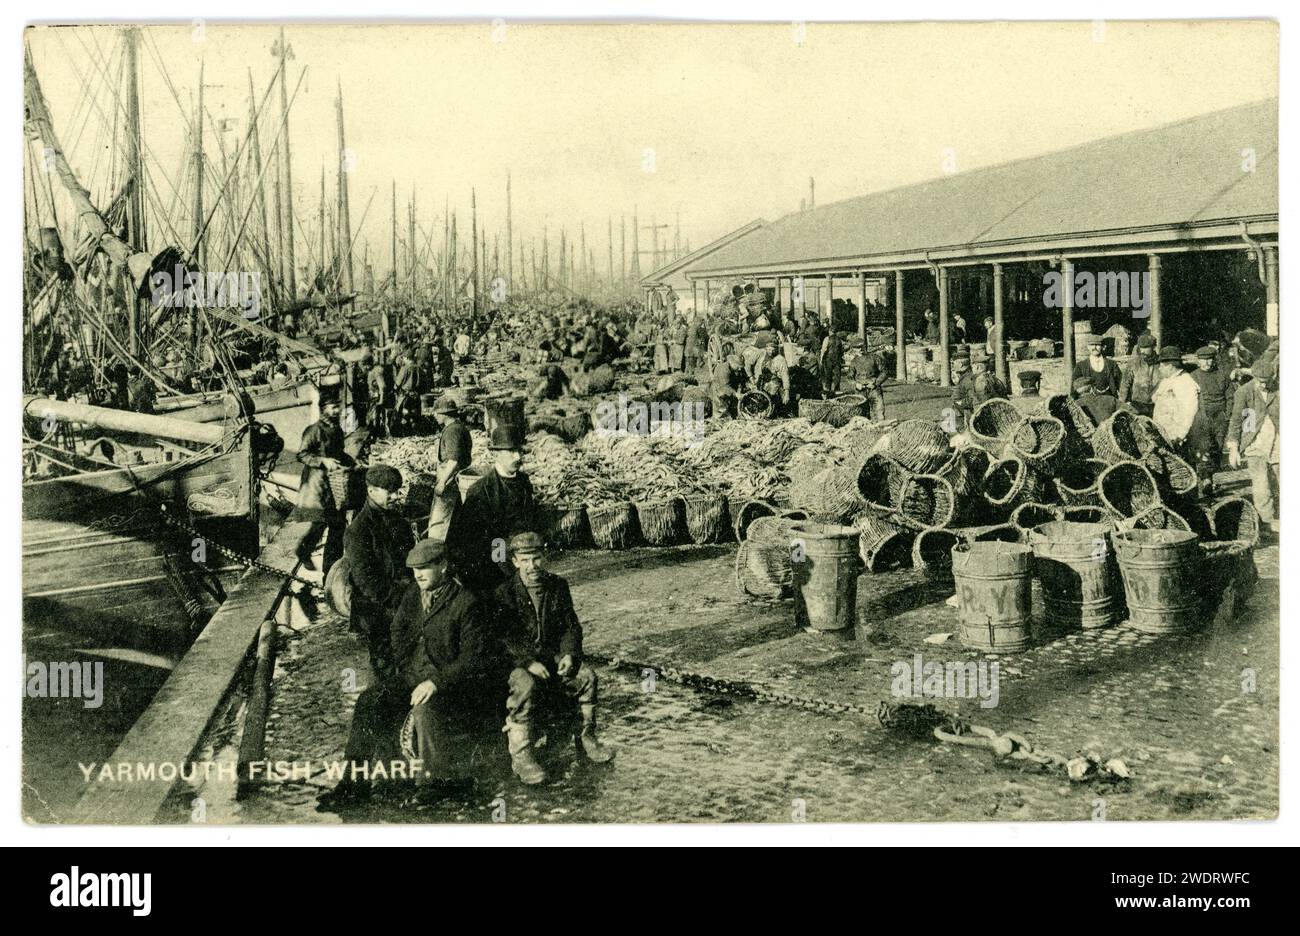 Original Edwardian era postcard of Yarmouth fish wharf,, selling herring from the quay, baskets of fish known as 'silver darlings' loaded with fish were known as 'crens'  Great Yarmouth, Norfolk,, U.K. Dated / posted 1906 Stock Photo